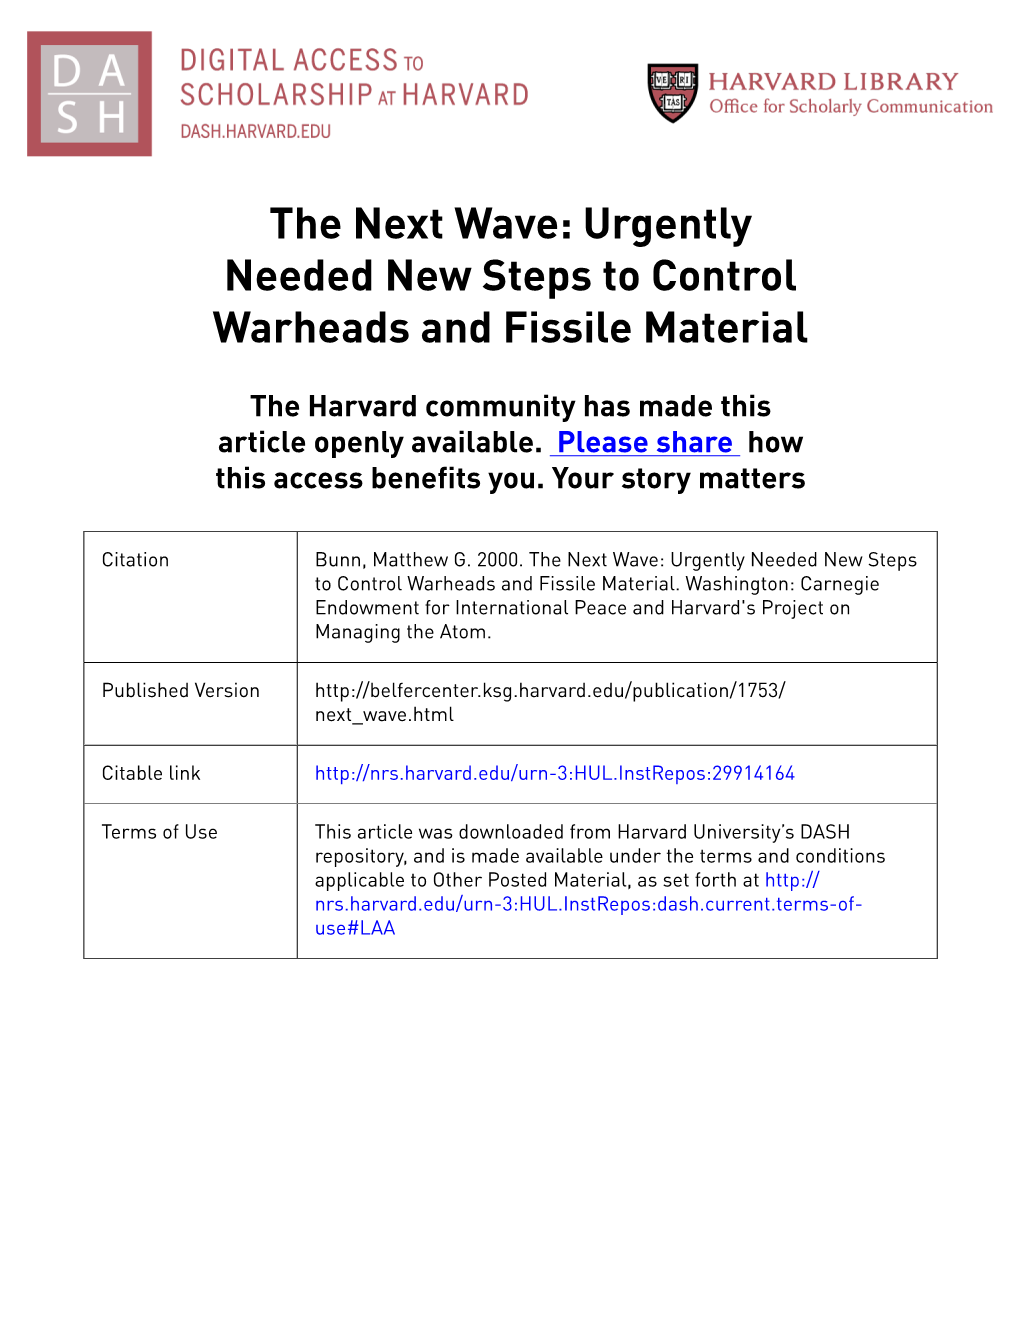 The Next Wave: Urgently Needed New Steps to Control Warheads and Fissile Material